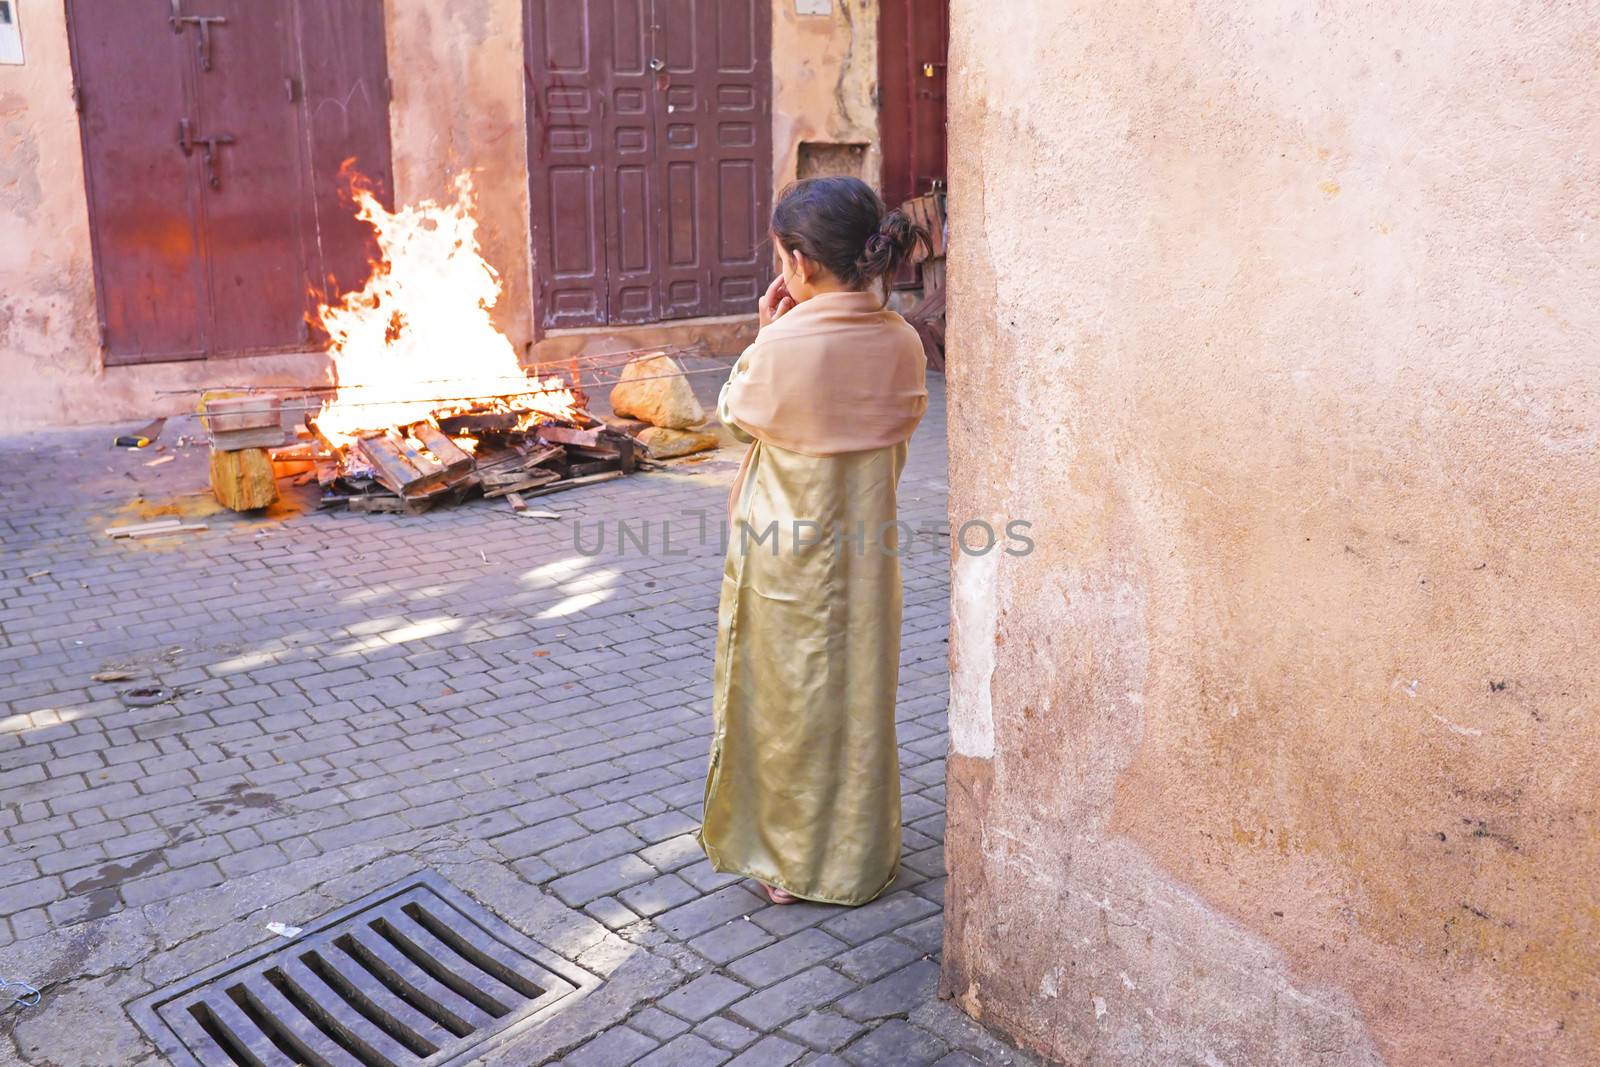 FES, MAROCCO - October 15 : Girl watching the fire on Eid al-Adha, October 15, 2013. The festival is celebrated by sacrificing a lamb or other animal and distributing the meat to relatives, friends, and the poor.